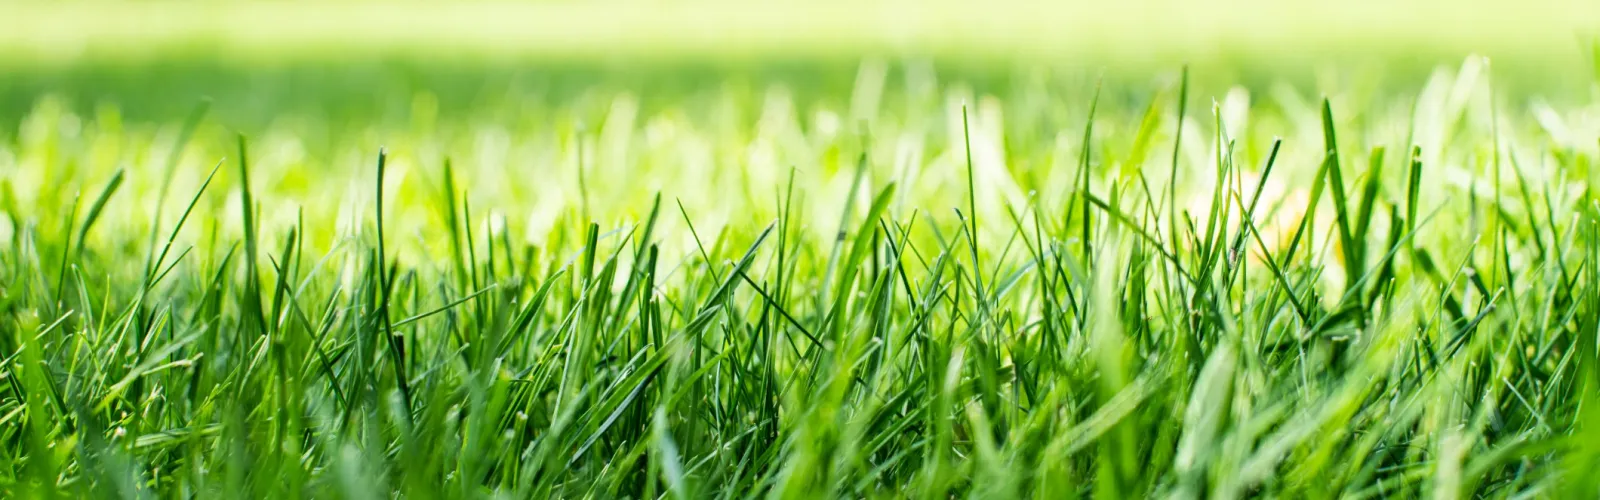 Close up of a green sod lawn